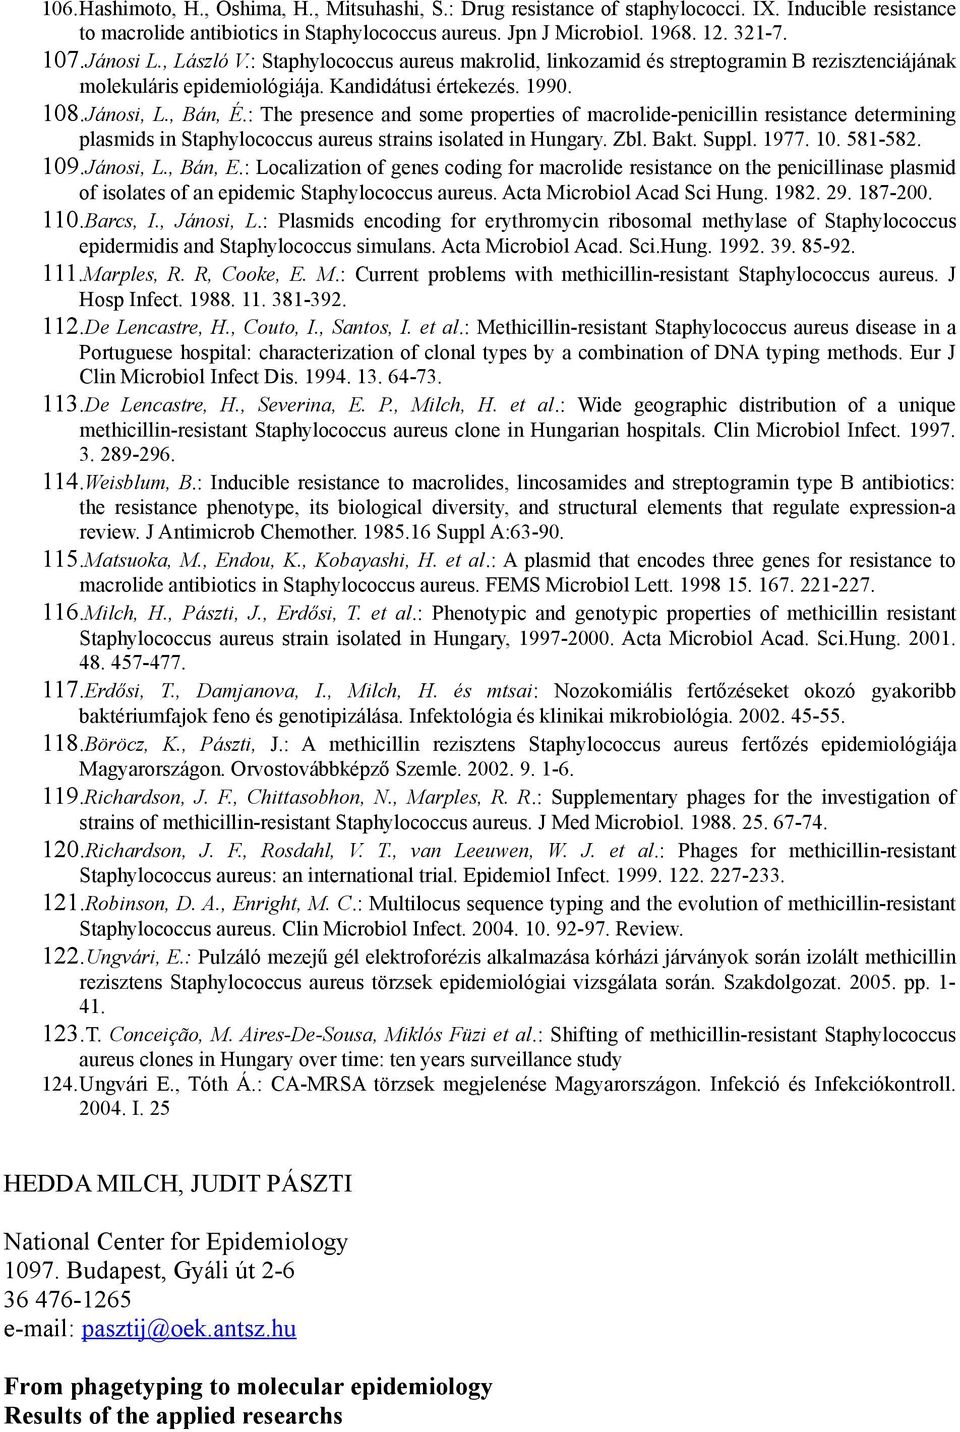 : The presence and some properties of macrolide-penicillin resistance determining plasmids in Staphylococcus aureus strains isolated in Hungary. Zbl. Bakt. Suppl. 1977. 10. 581-582. 109.Jánosi, L.